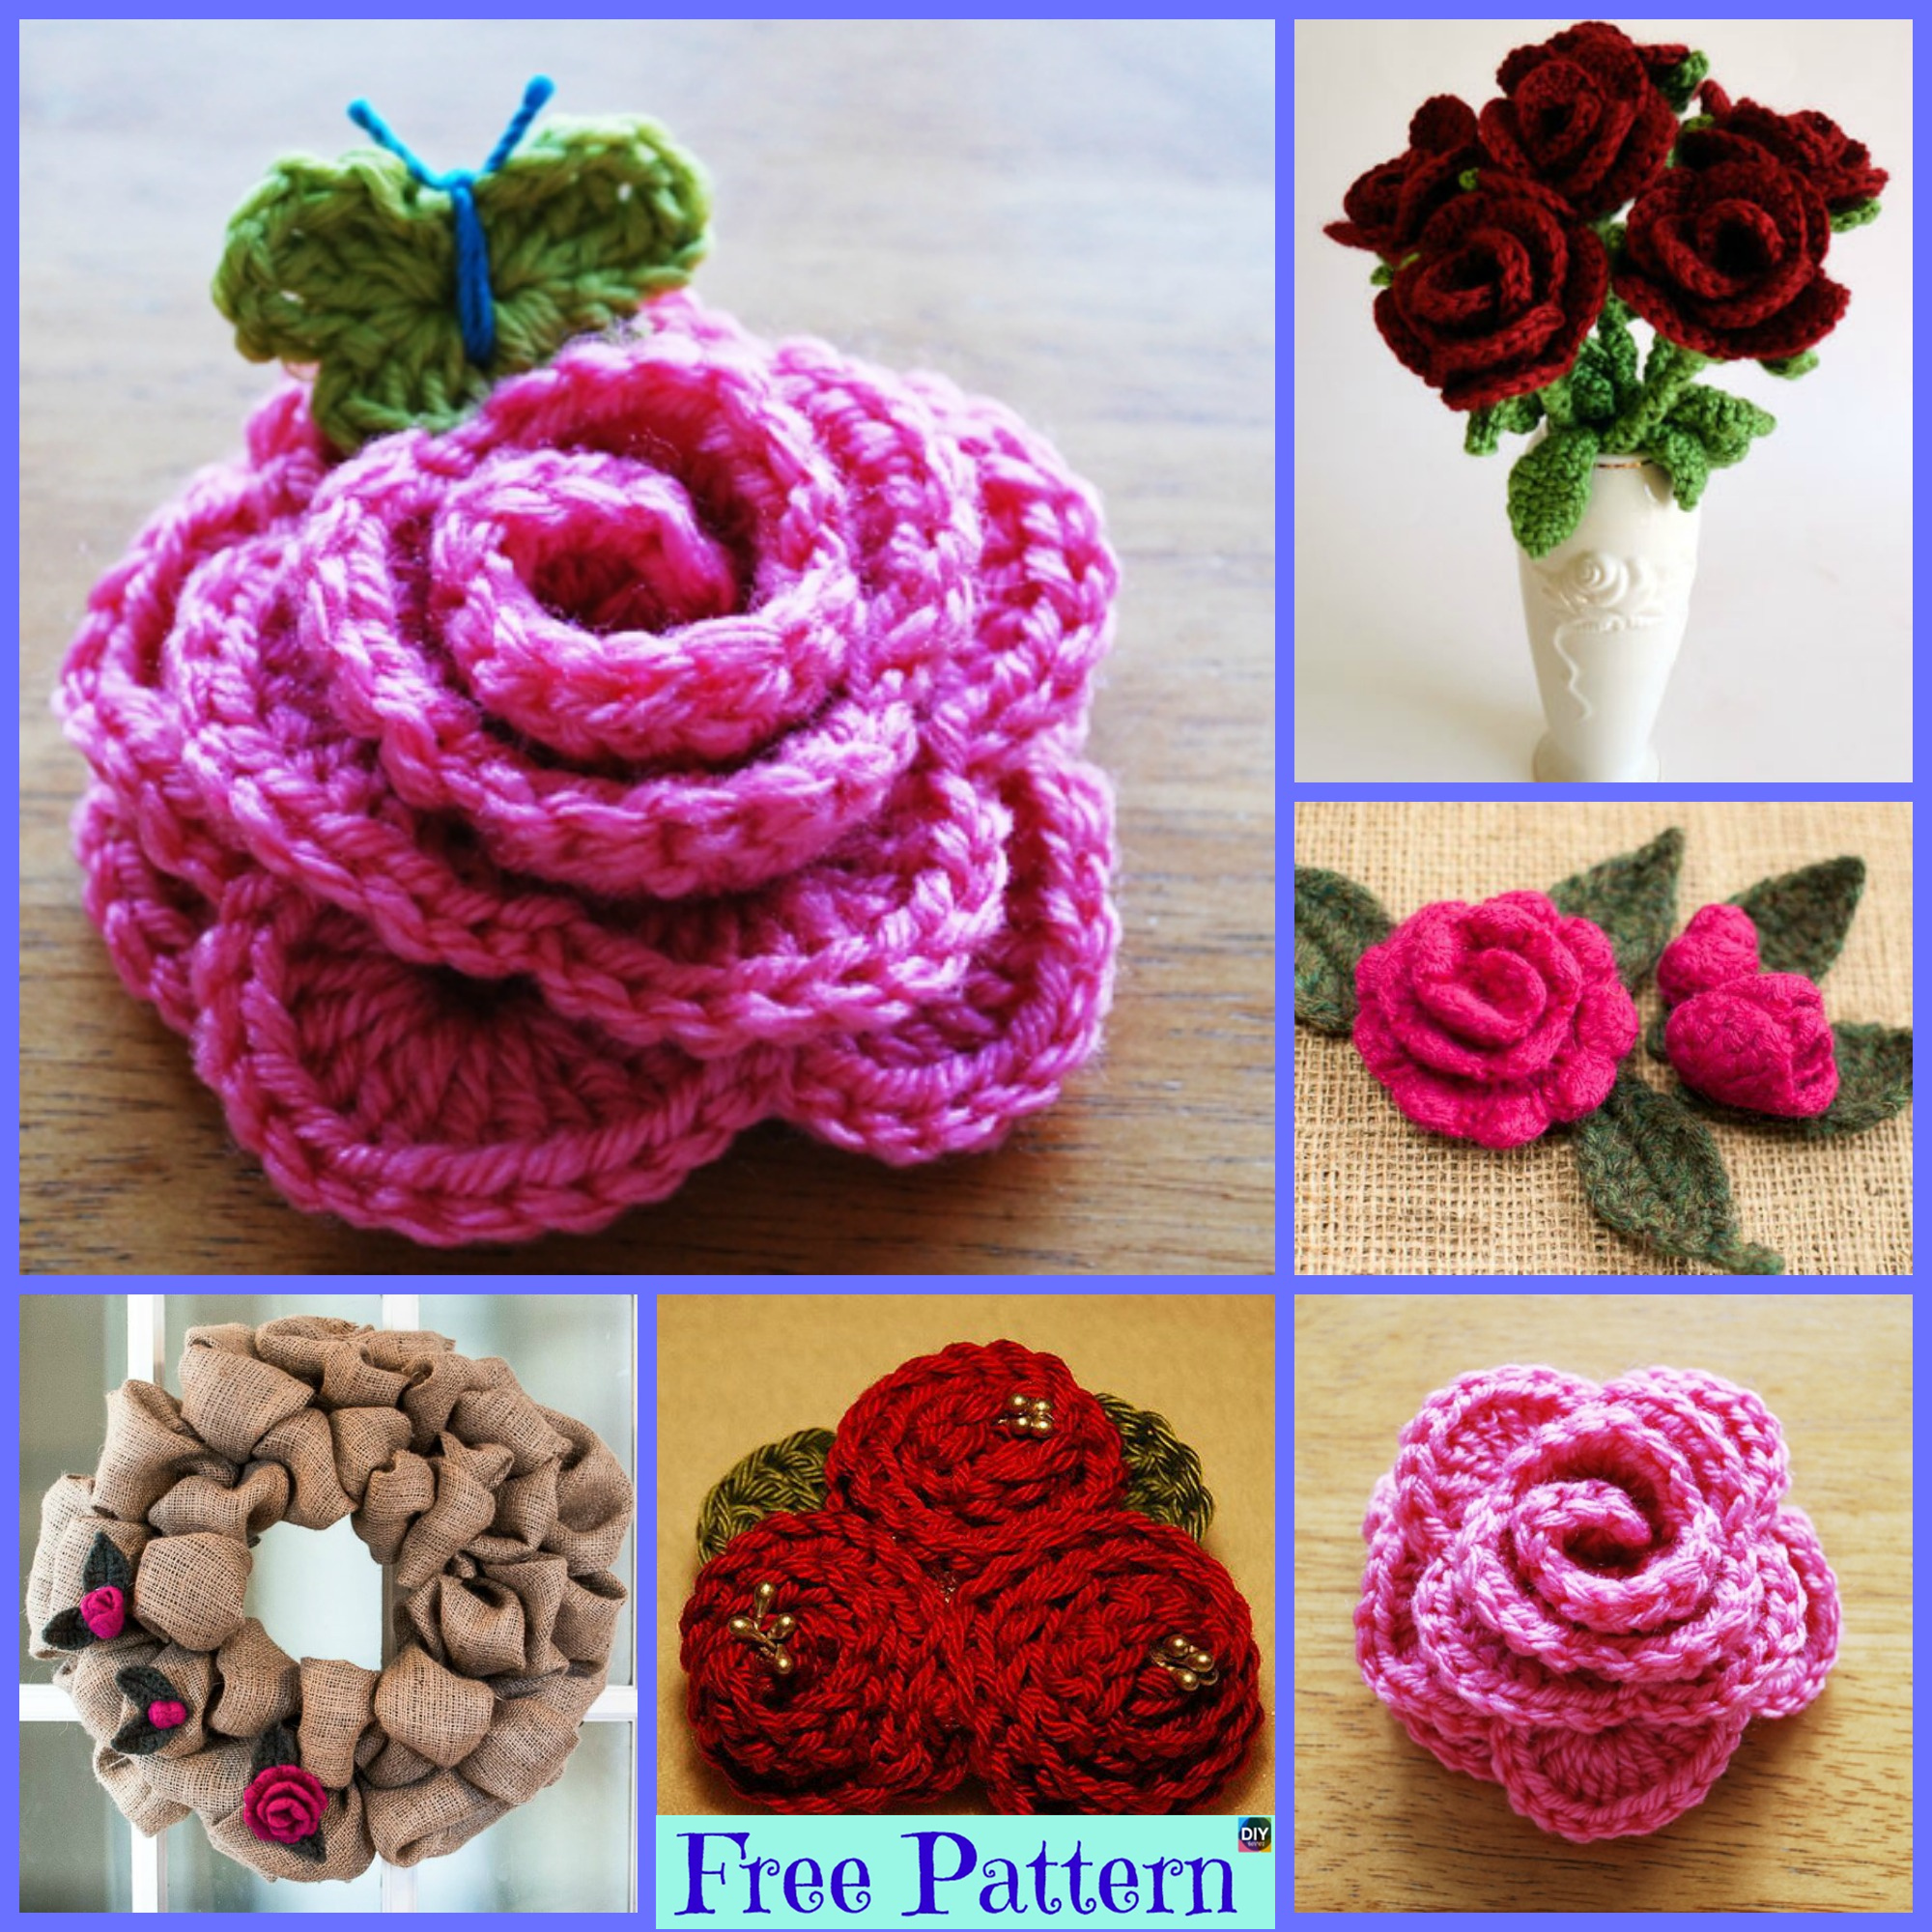 12 Beautiful Crocheted Flowers - Free Patterns - DIY 4 EVER